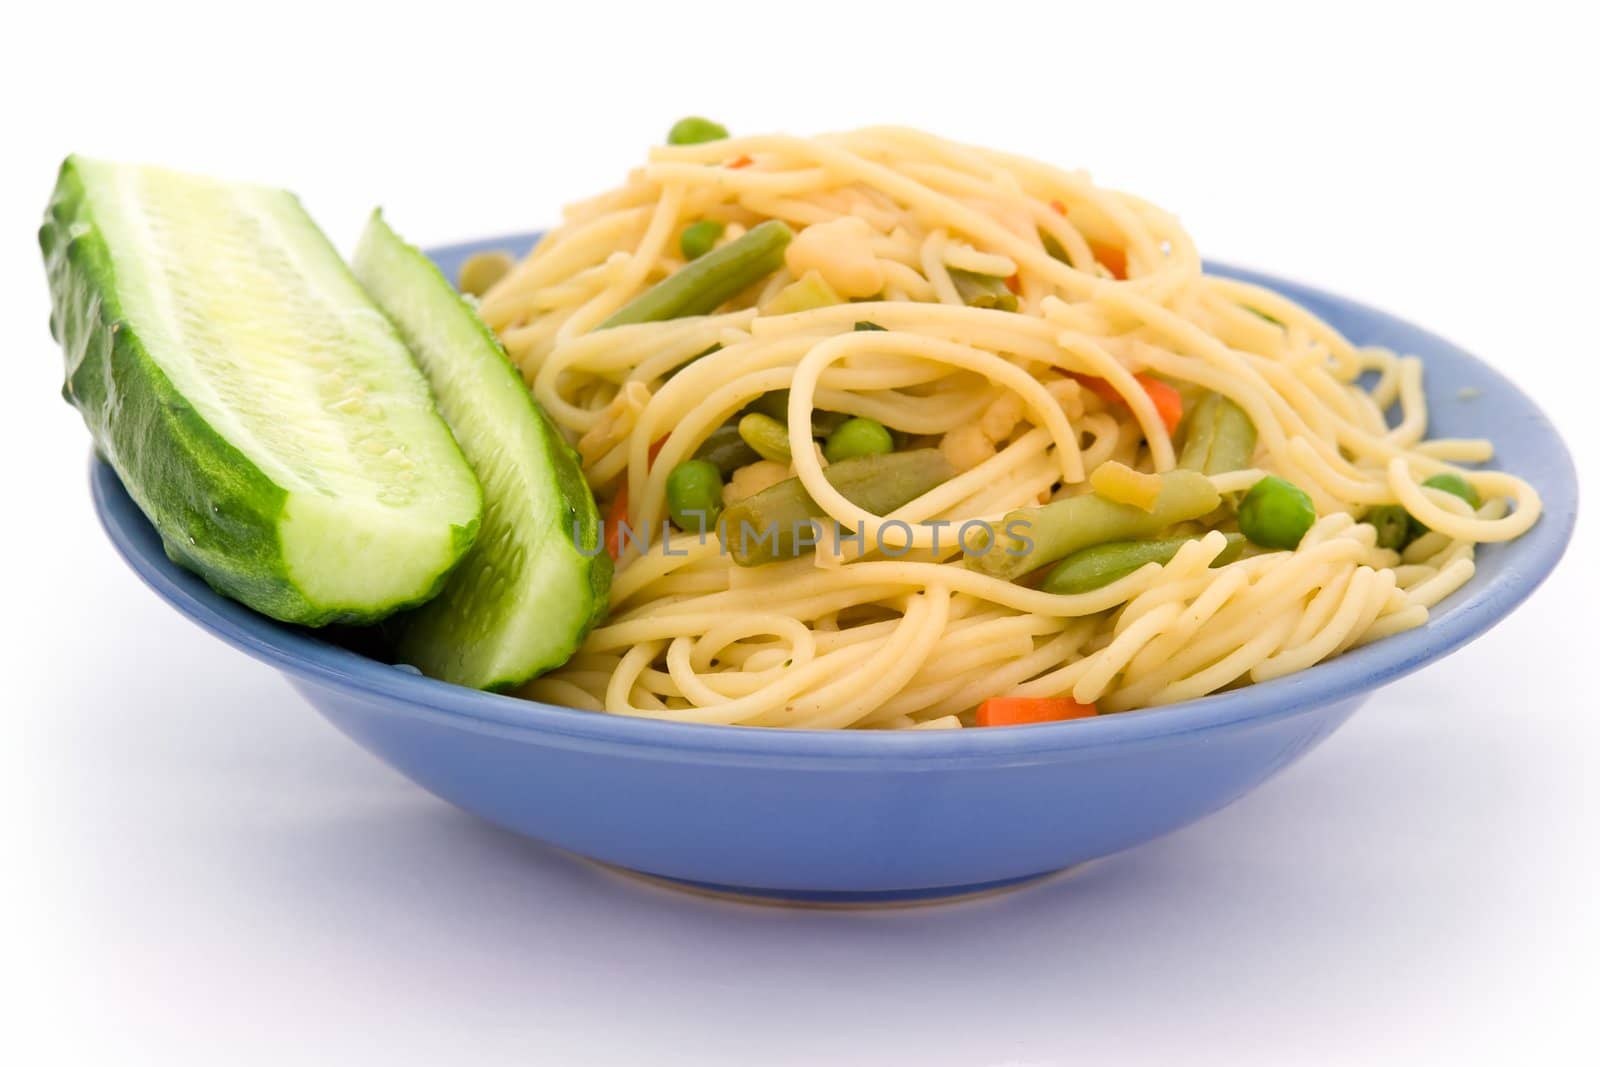 Spaghetti and green cucumber in a blue plate on a white background